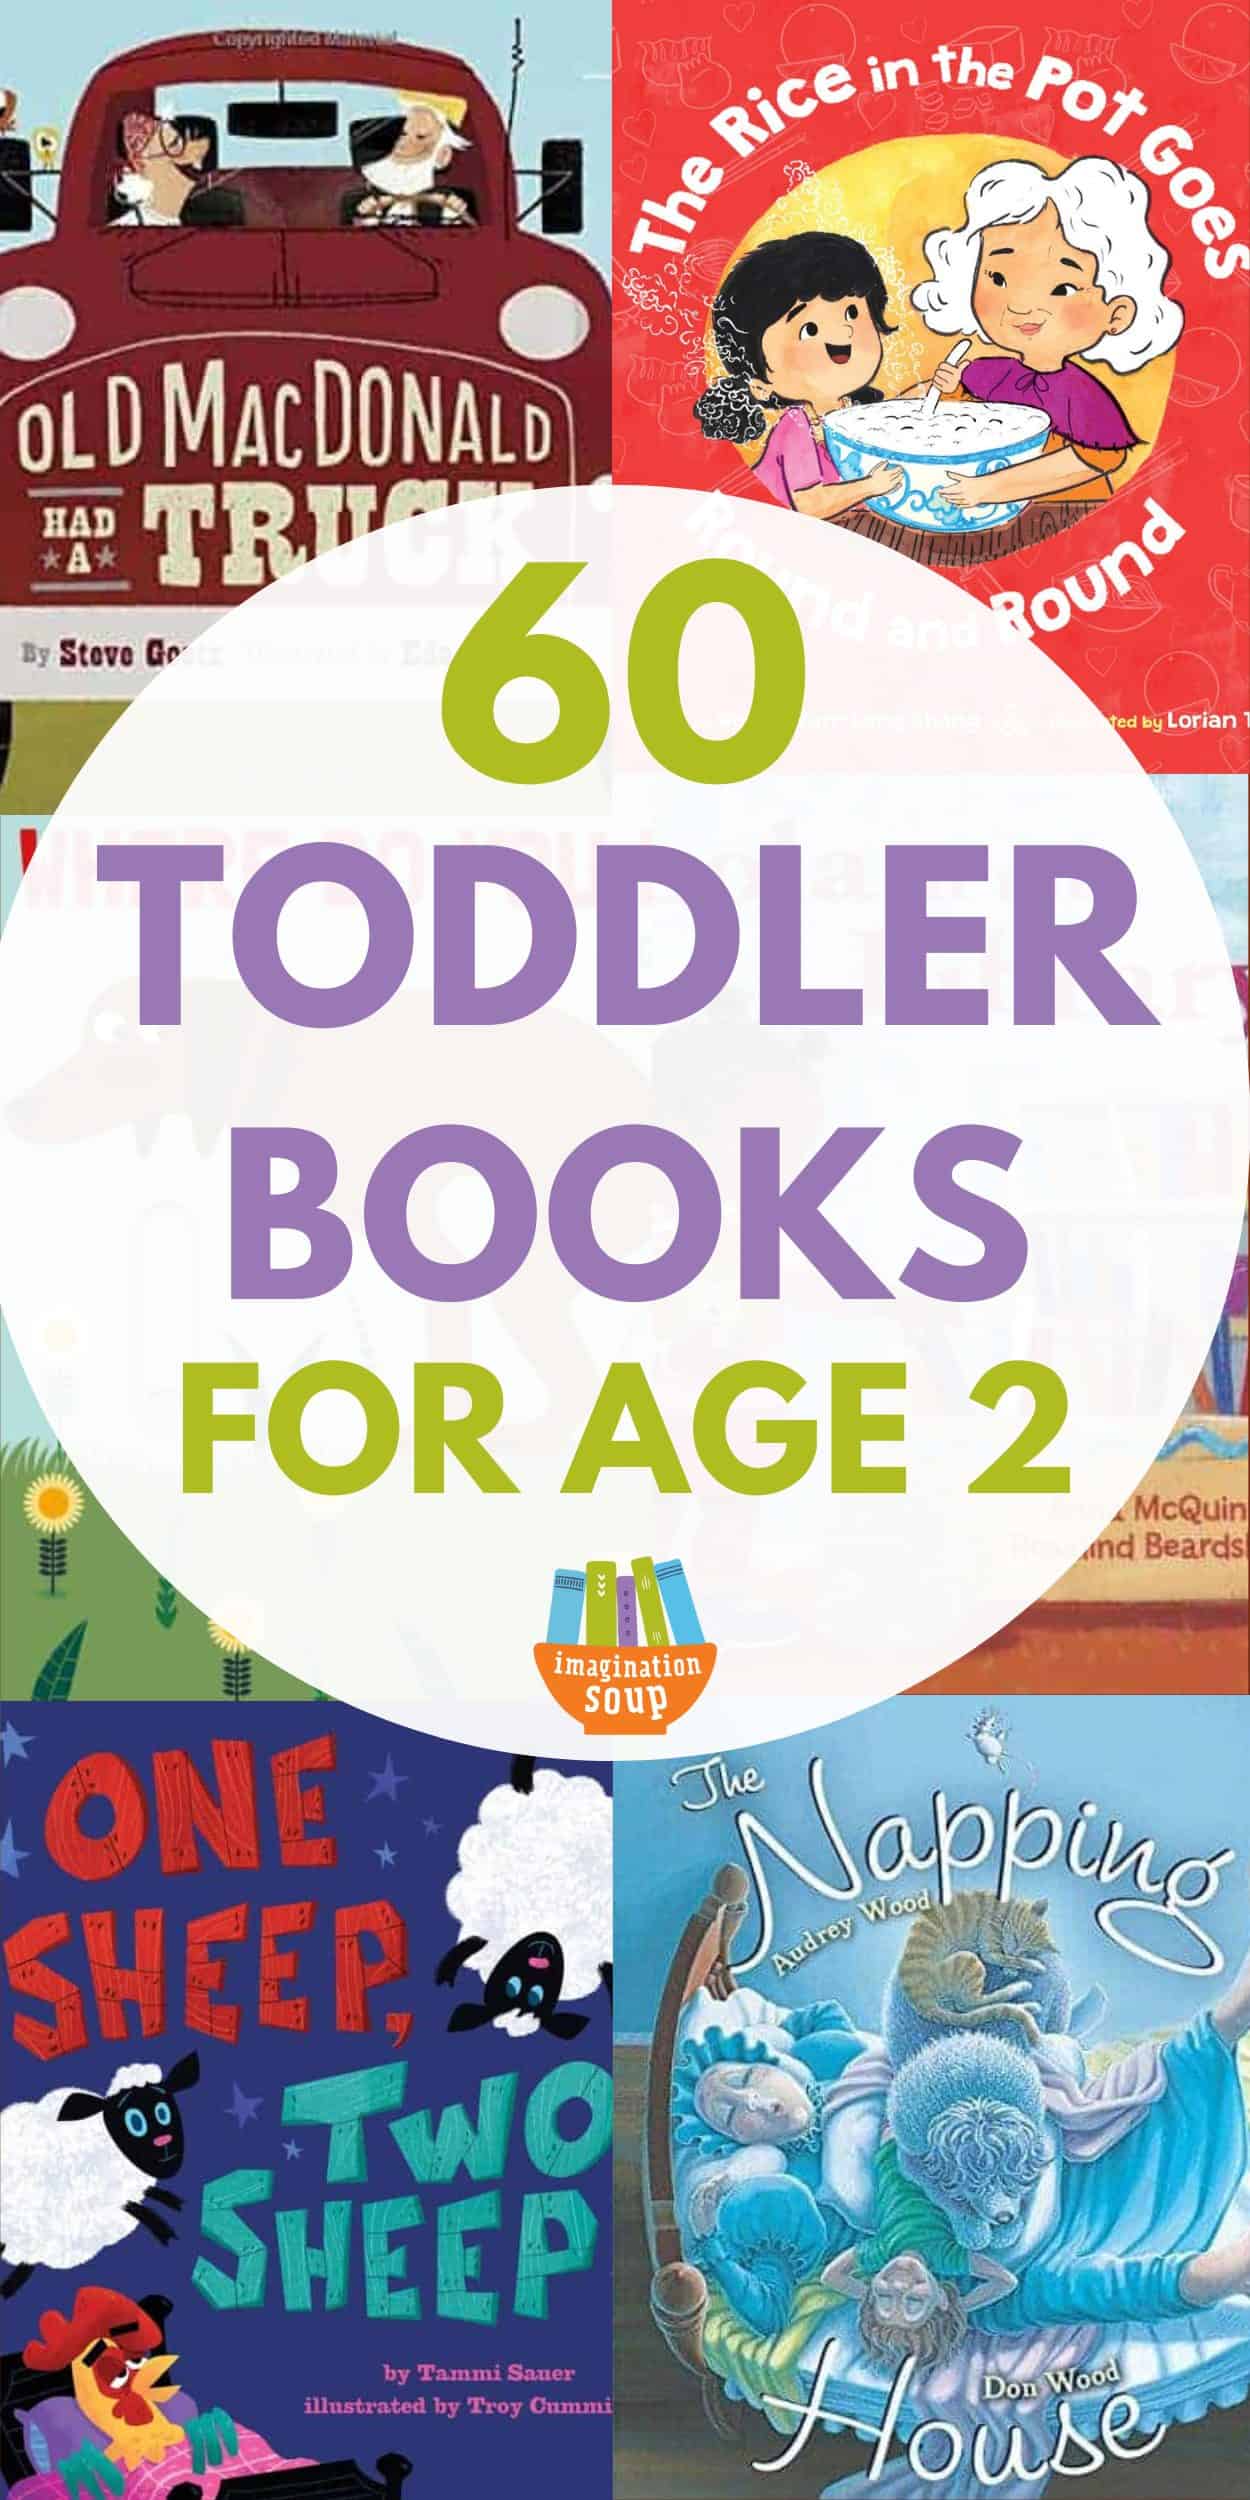 Reading toddler books to your 2-year-olds benefits their growing brains, future literacy skills, and social/emotional growth. (Not to mention, it's fun!)

But, how do you pick the best board books and picture books? I've got you covered with top picks from kids, teachers, and parents!

Find a new favorite book for the toddler readers on your lap with this list of good picture books to you can read to your 2-year-olds-- that they will love!